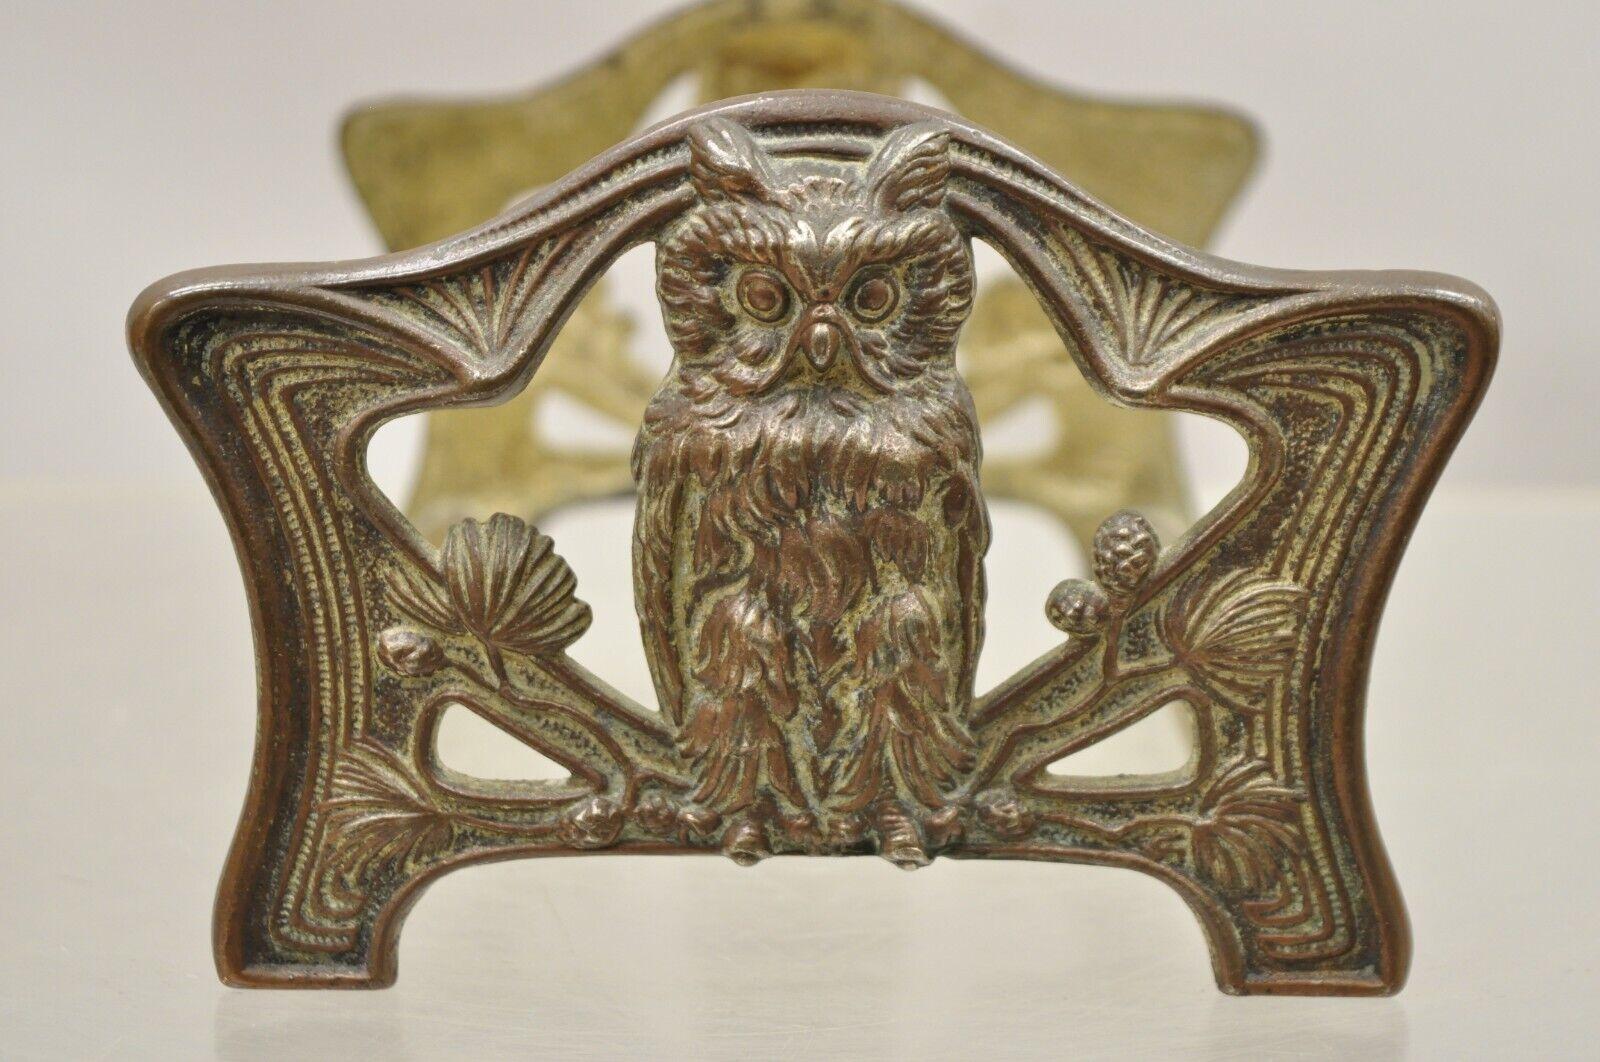 Antique bronze Art Nouveauowl expandable bookends book rack. Item features Metal frame, very nice antique item, quality American craftsmanship, great style and form, circa Early 1900s. Measurements: 4.5